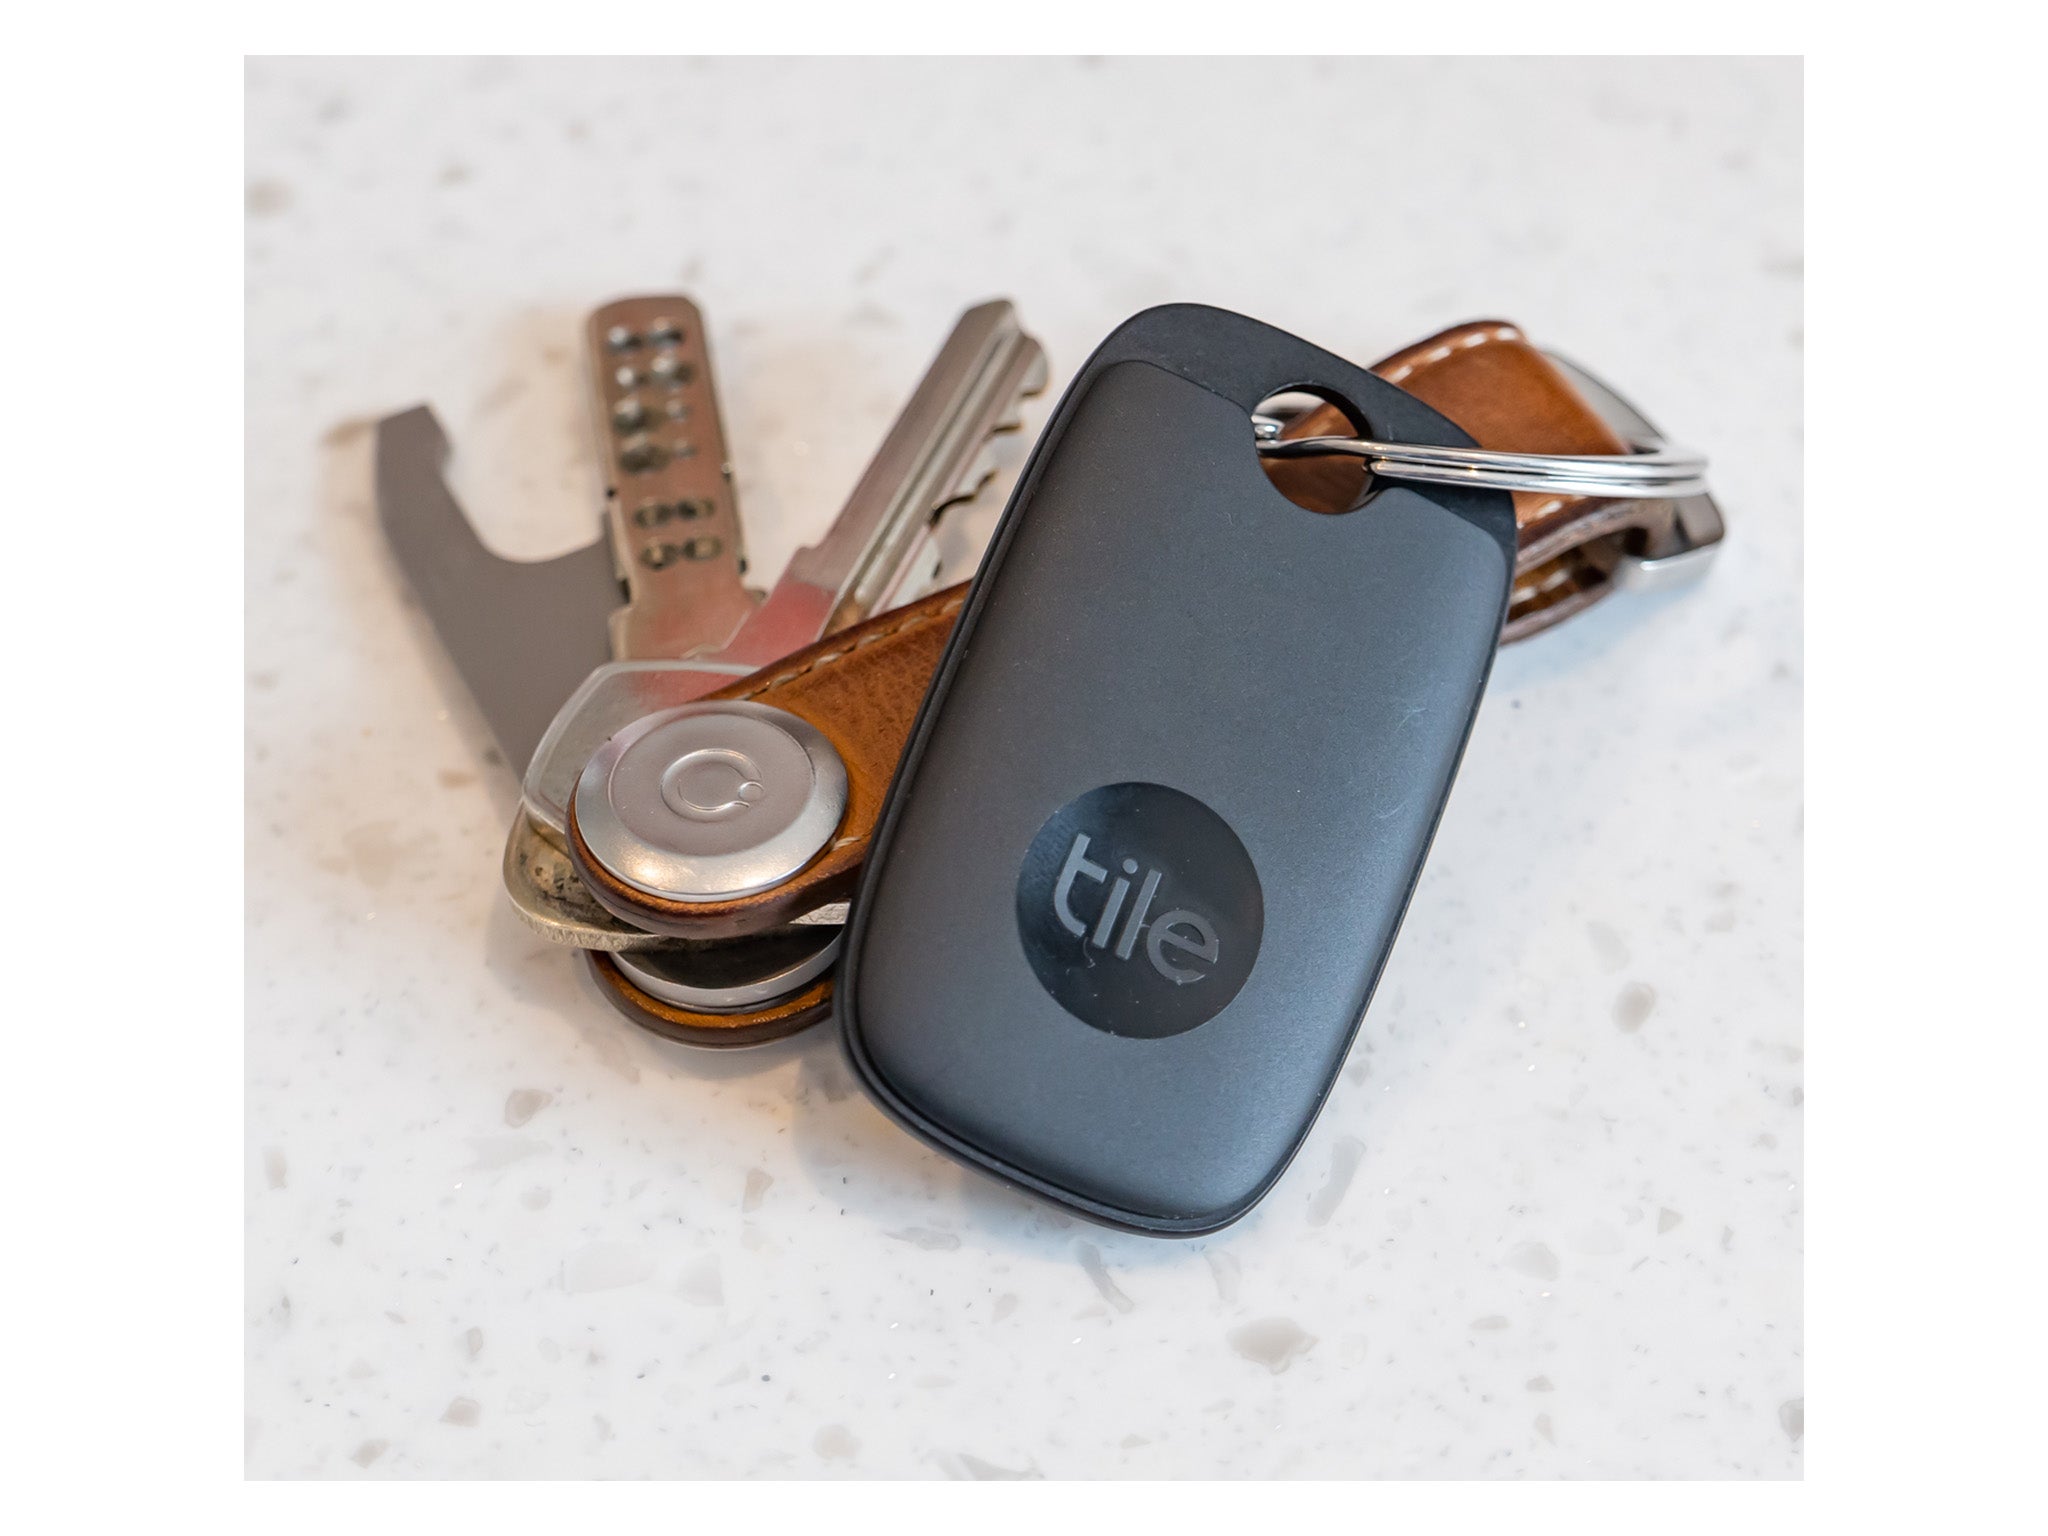 Tile pro key finder review: Bluetooth tracker for iPhone and